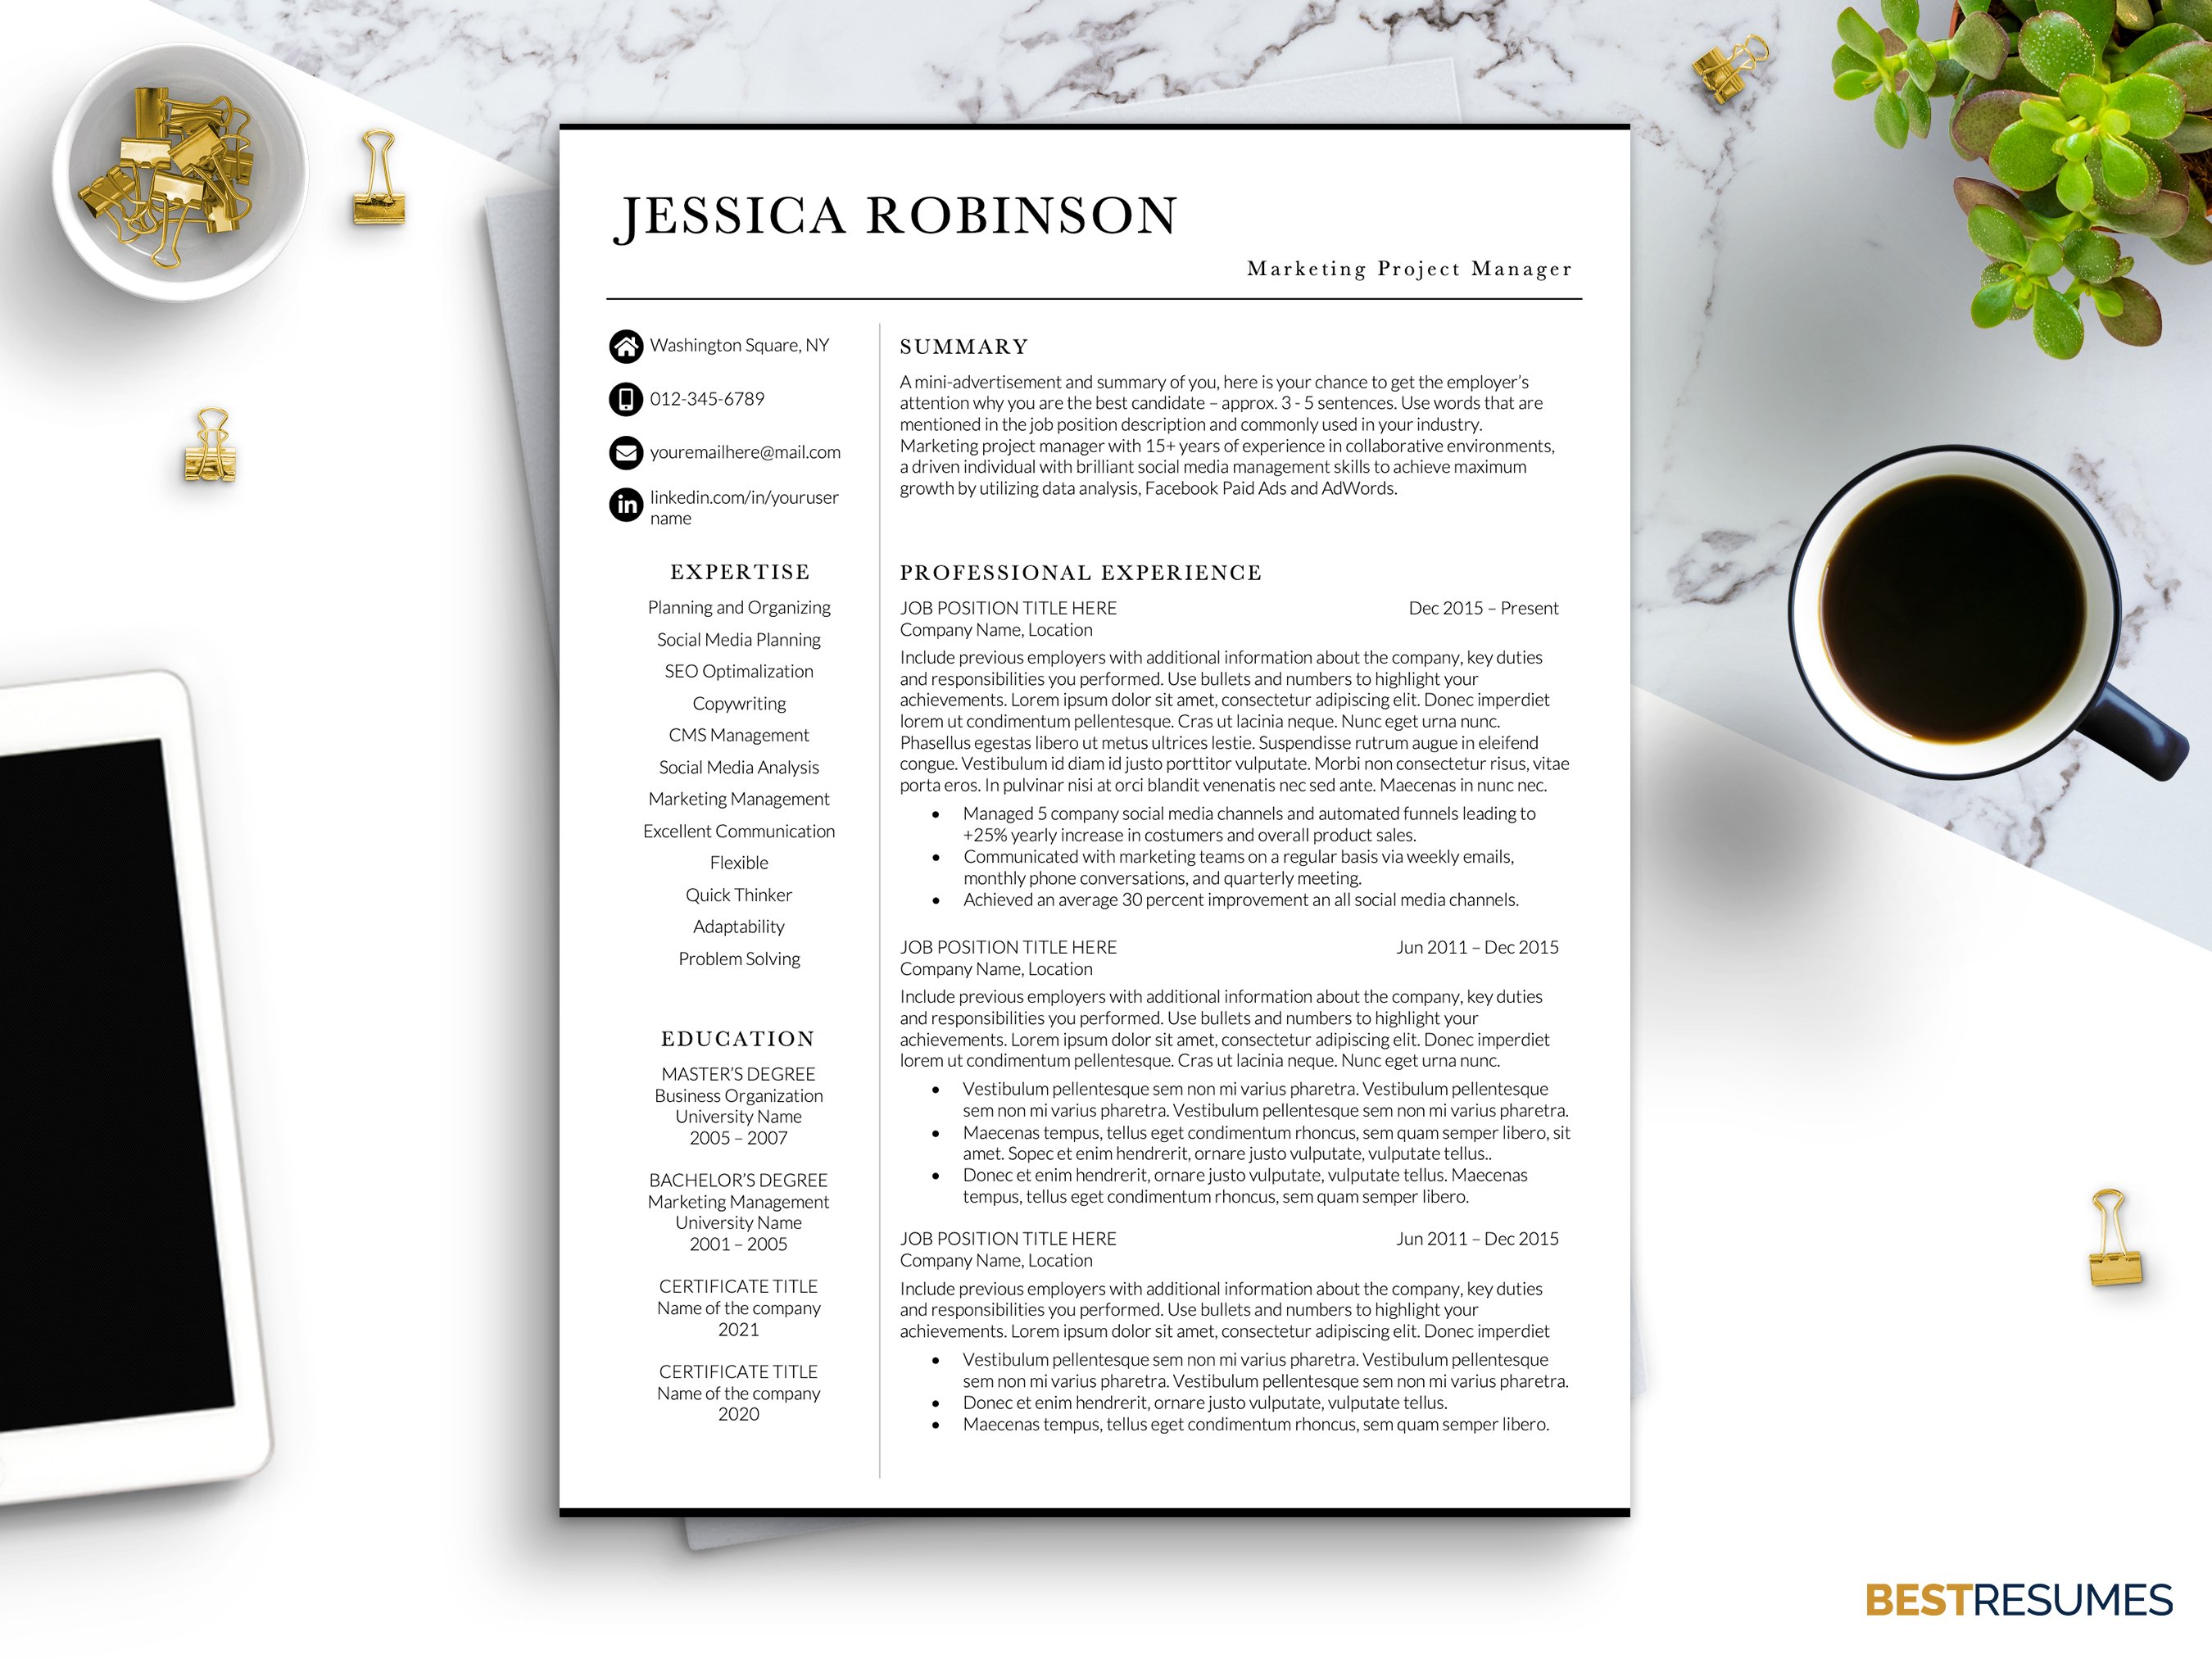 Marketing Manager Resume CV Template cover image.